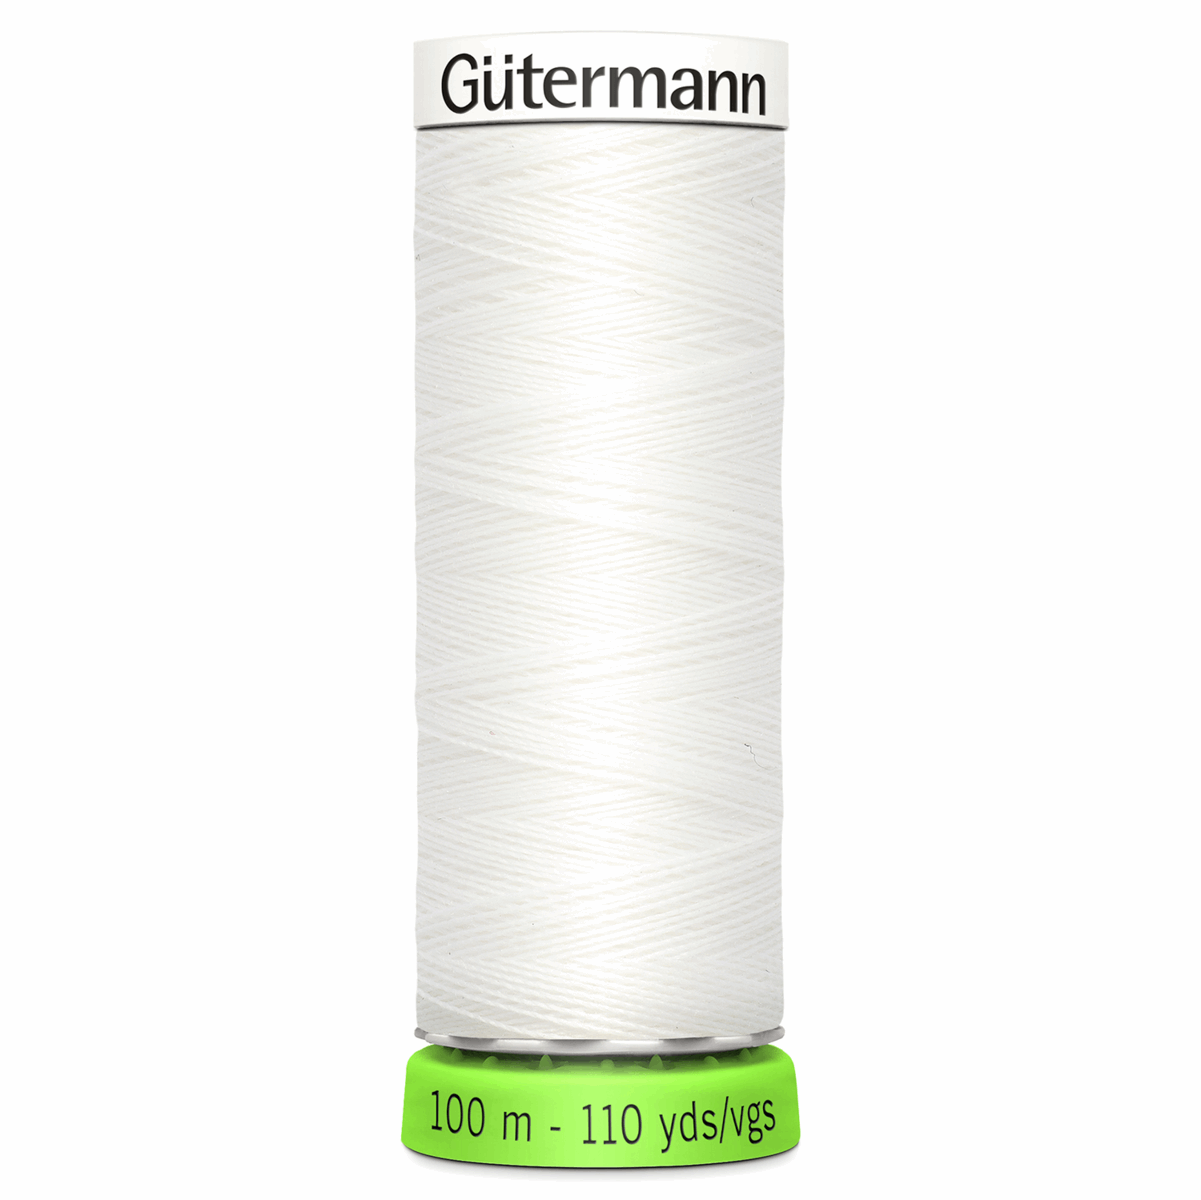 Gutermann Recycled Sew-All Thread rPET 100m 800 White